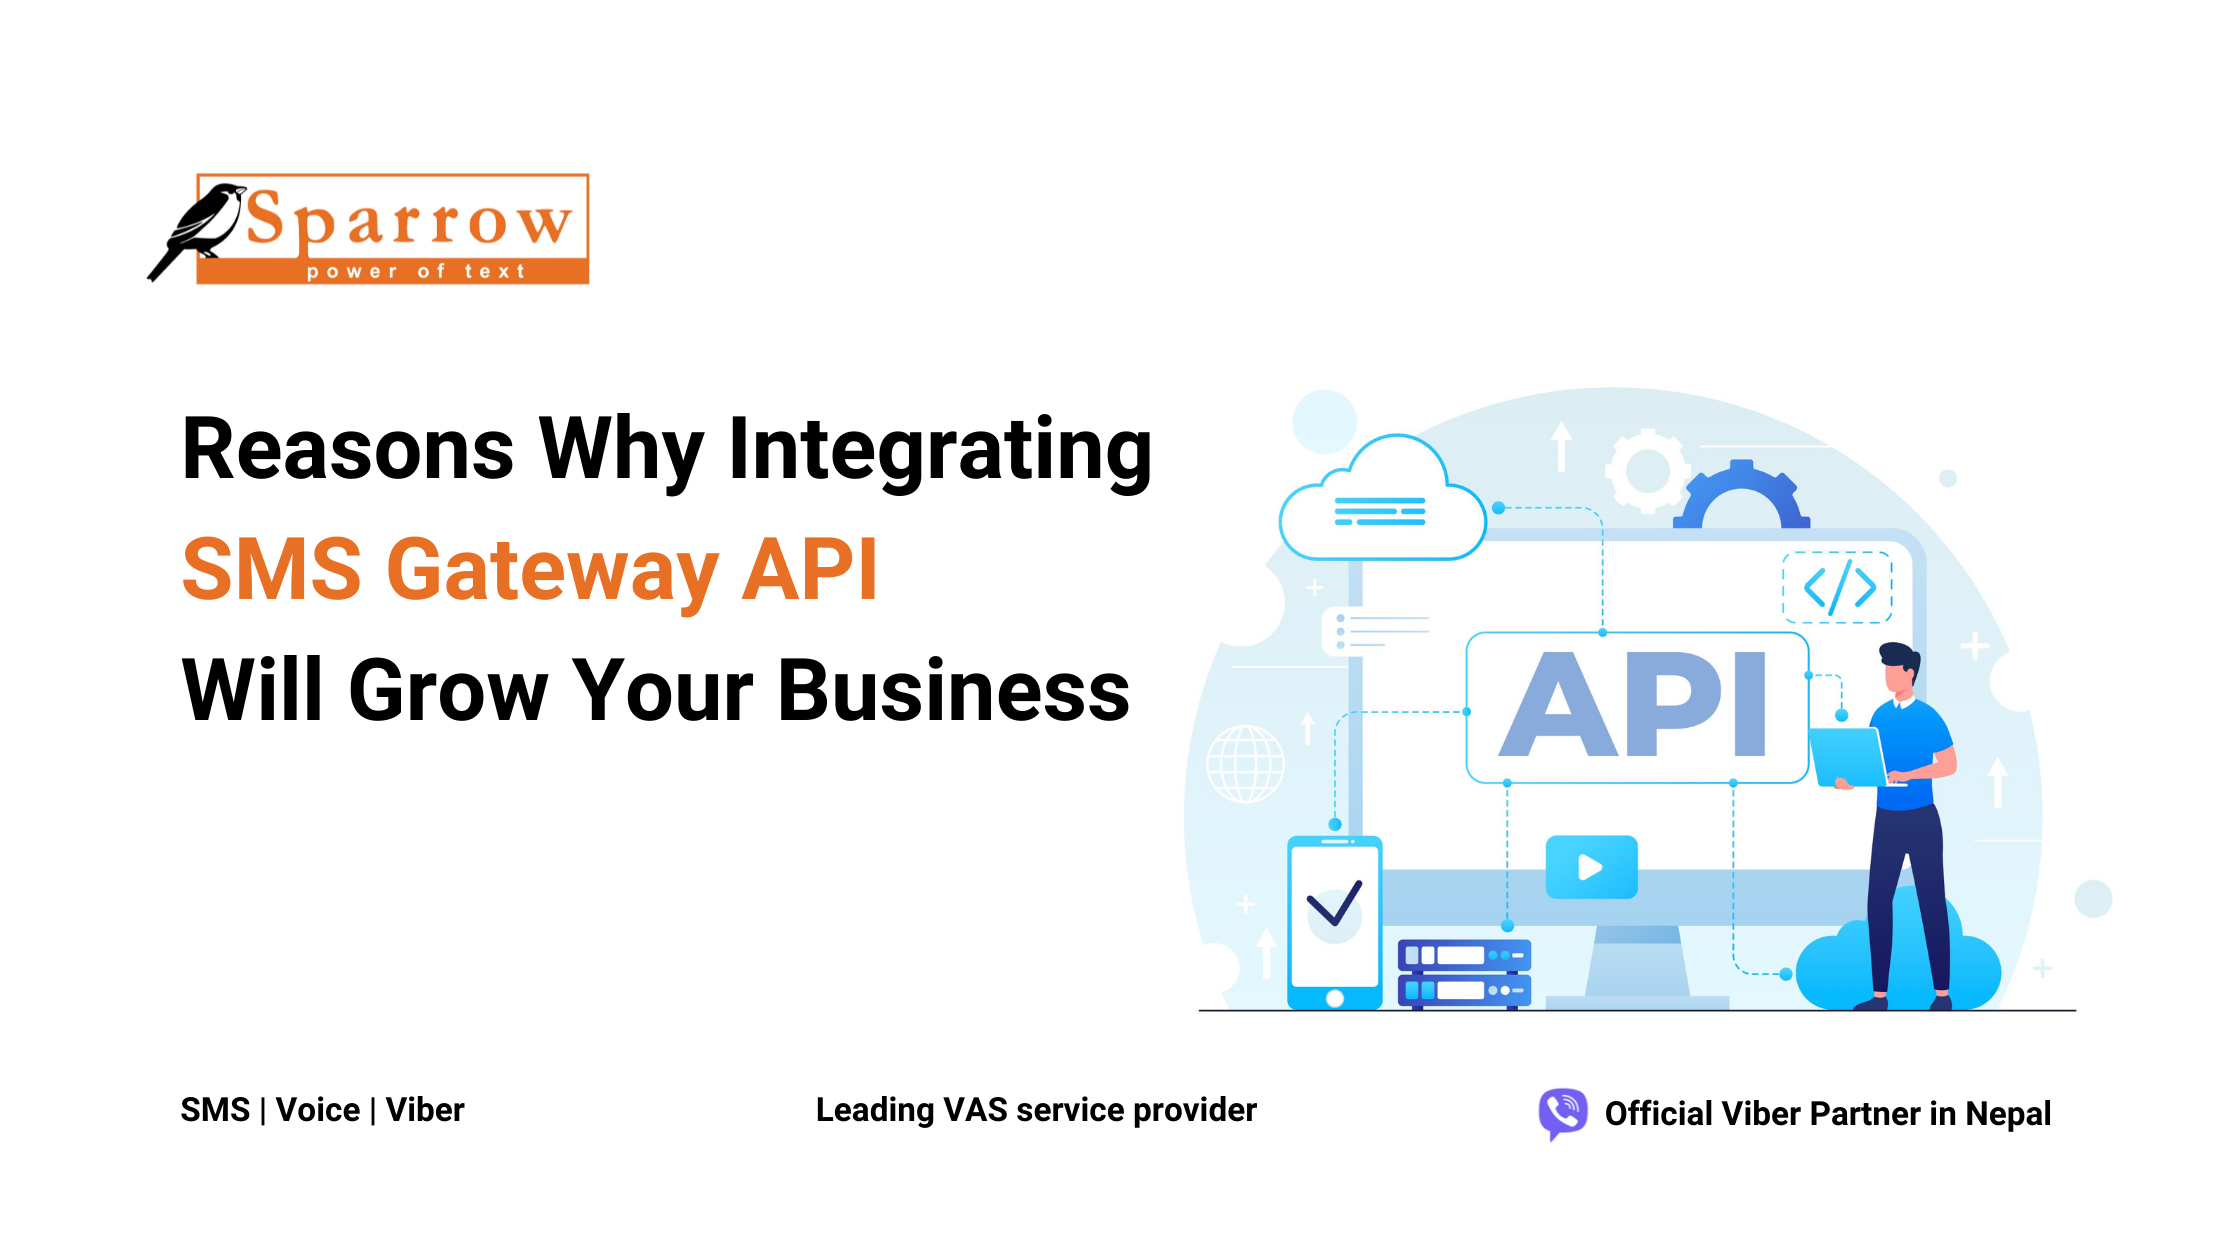 Reasons Why Integrating SMS Gateway API Will Grow Your Business